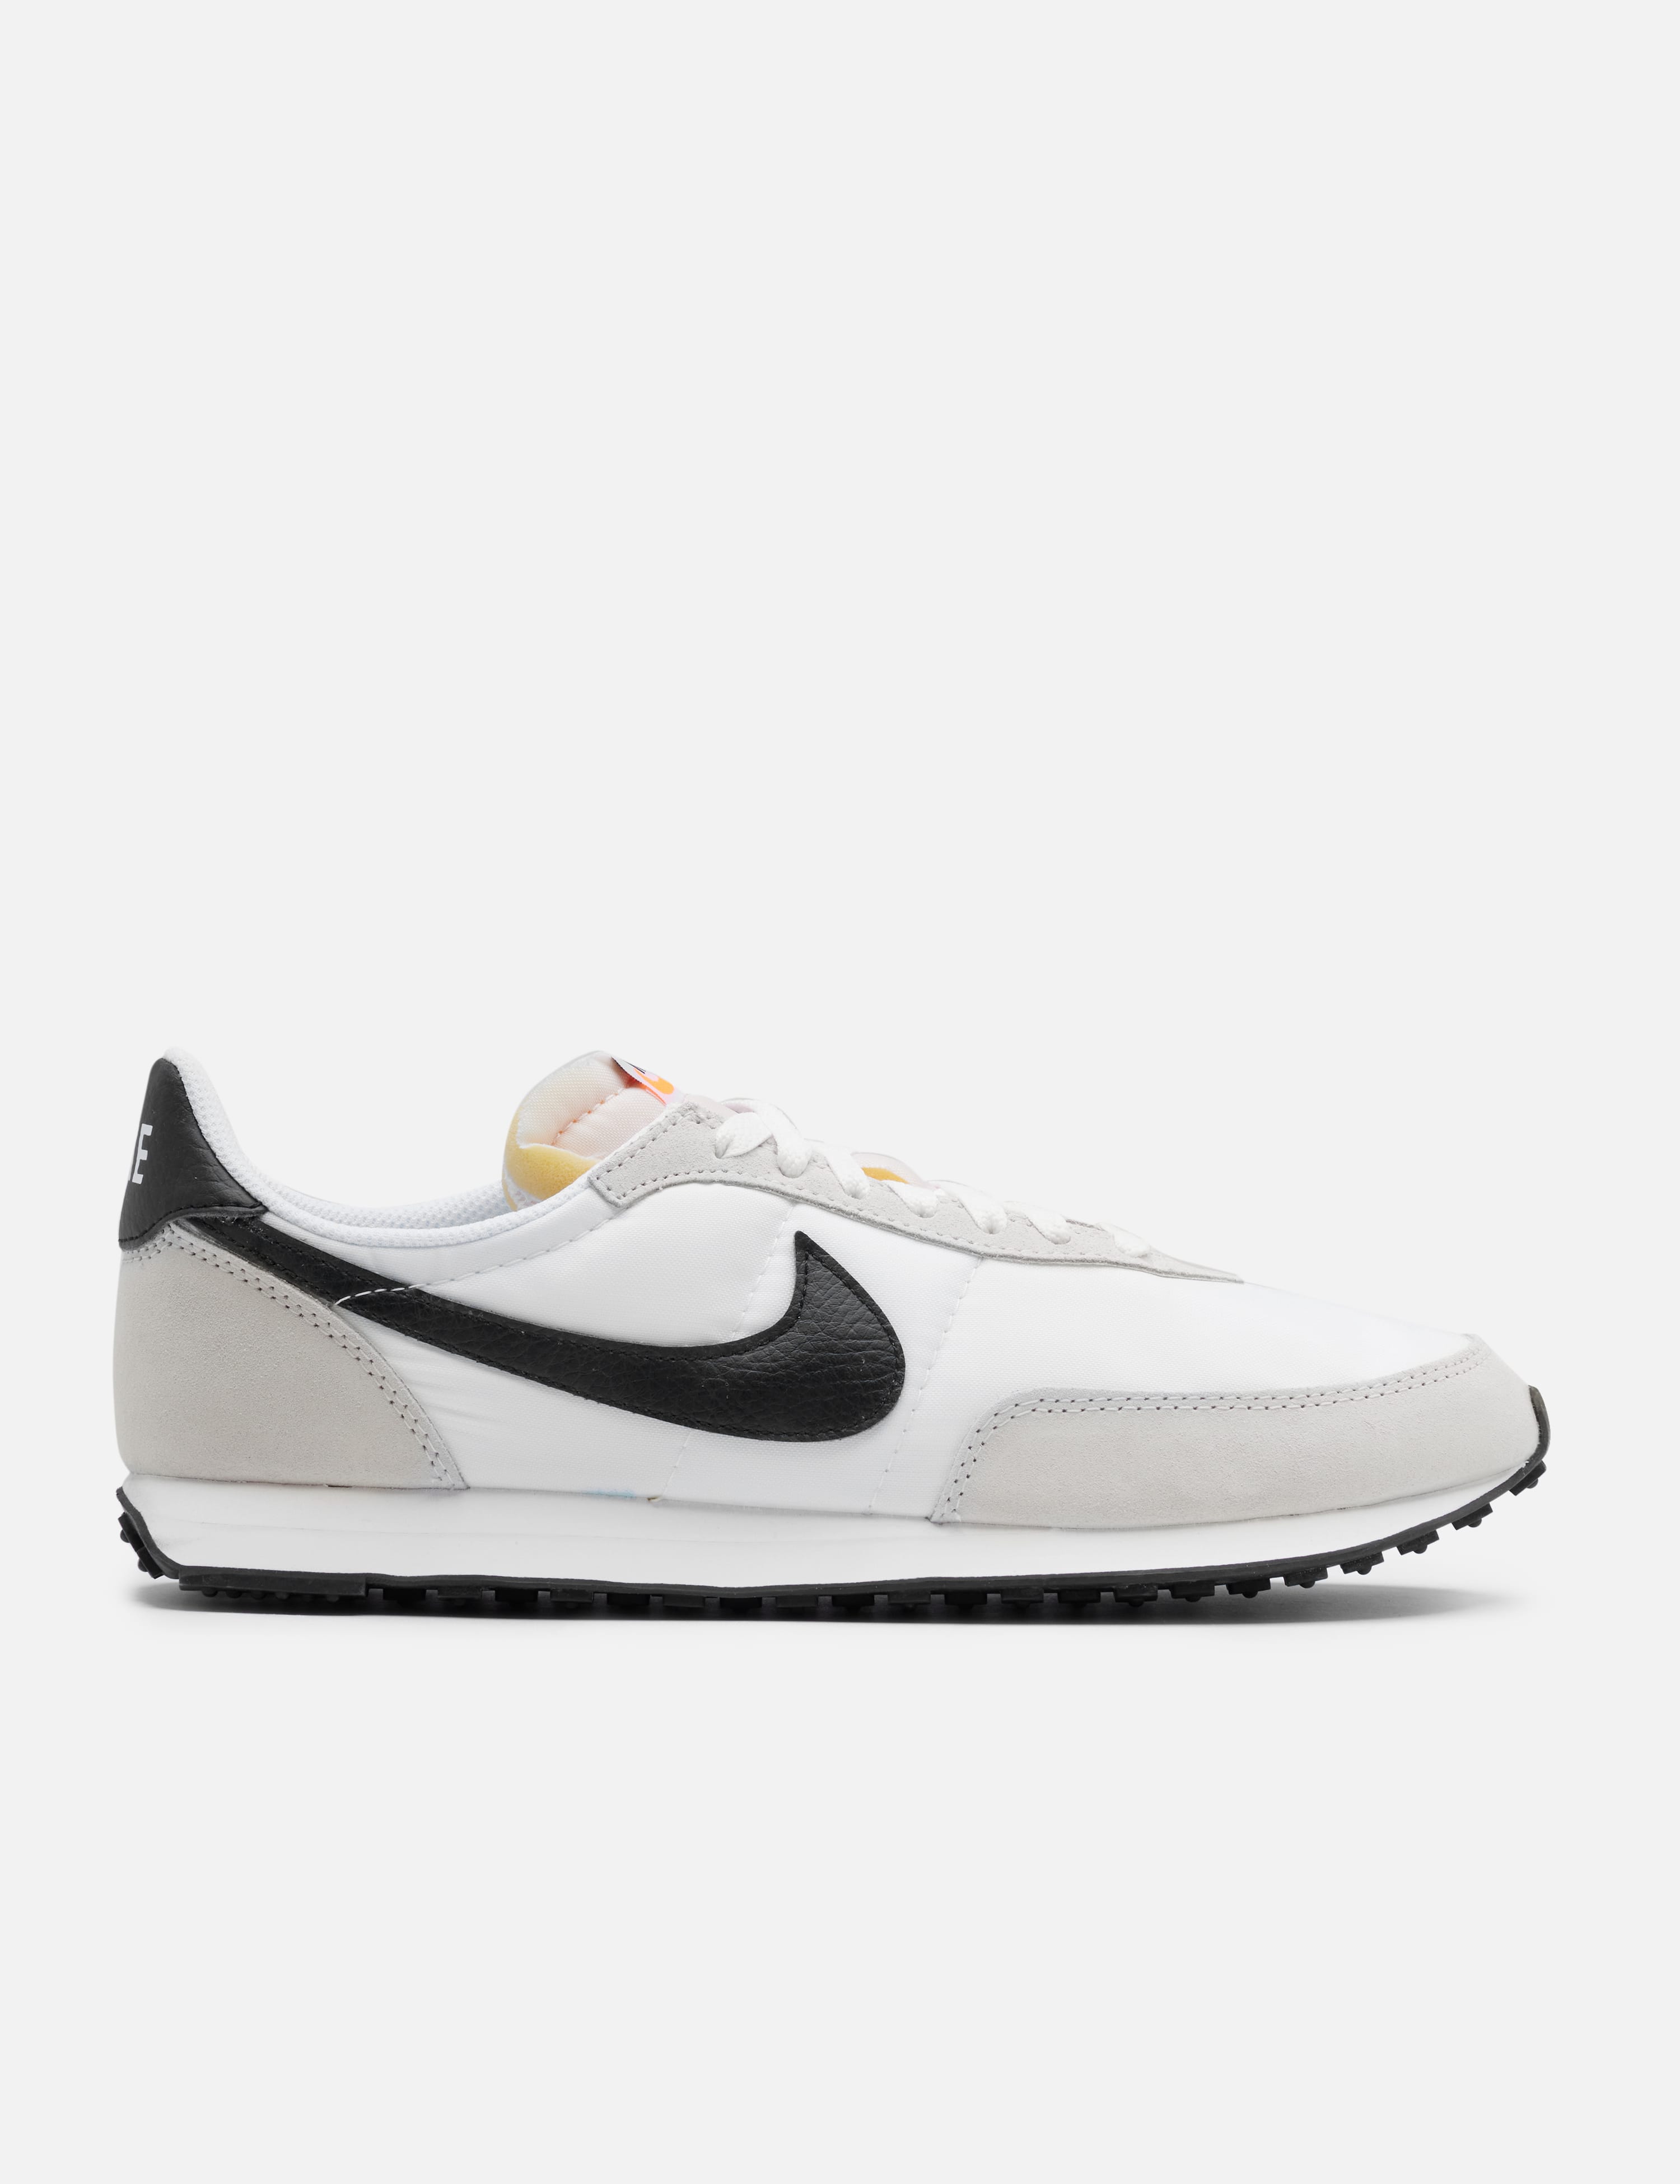 Nike - Nike Waffle Trainer 2 | HBX - Globally Curated Fashion and